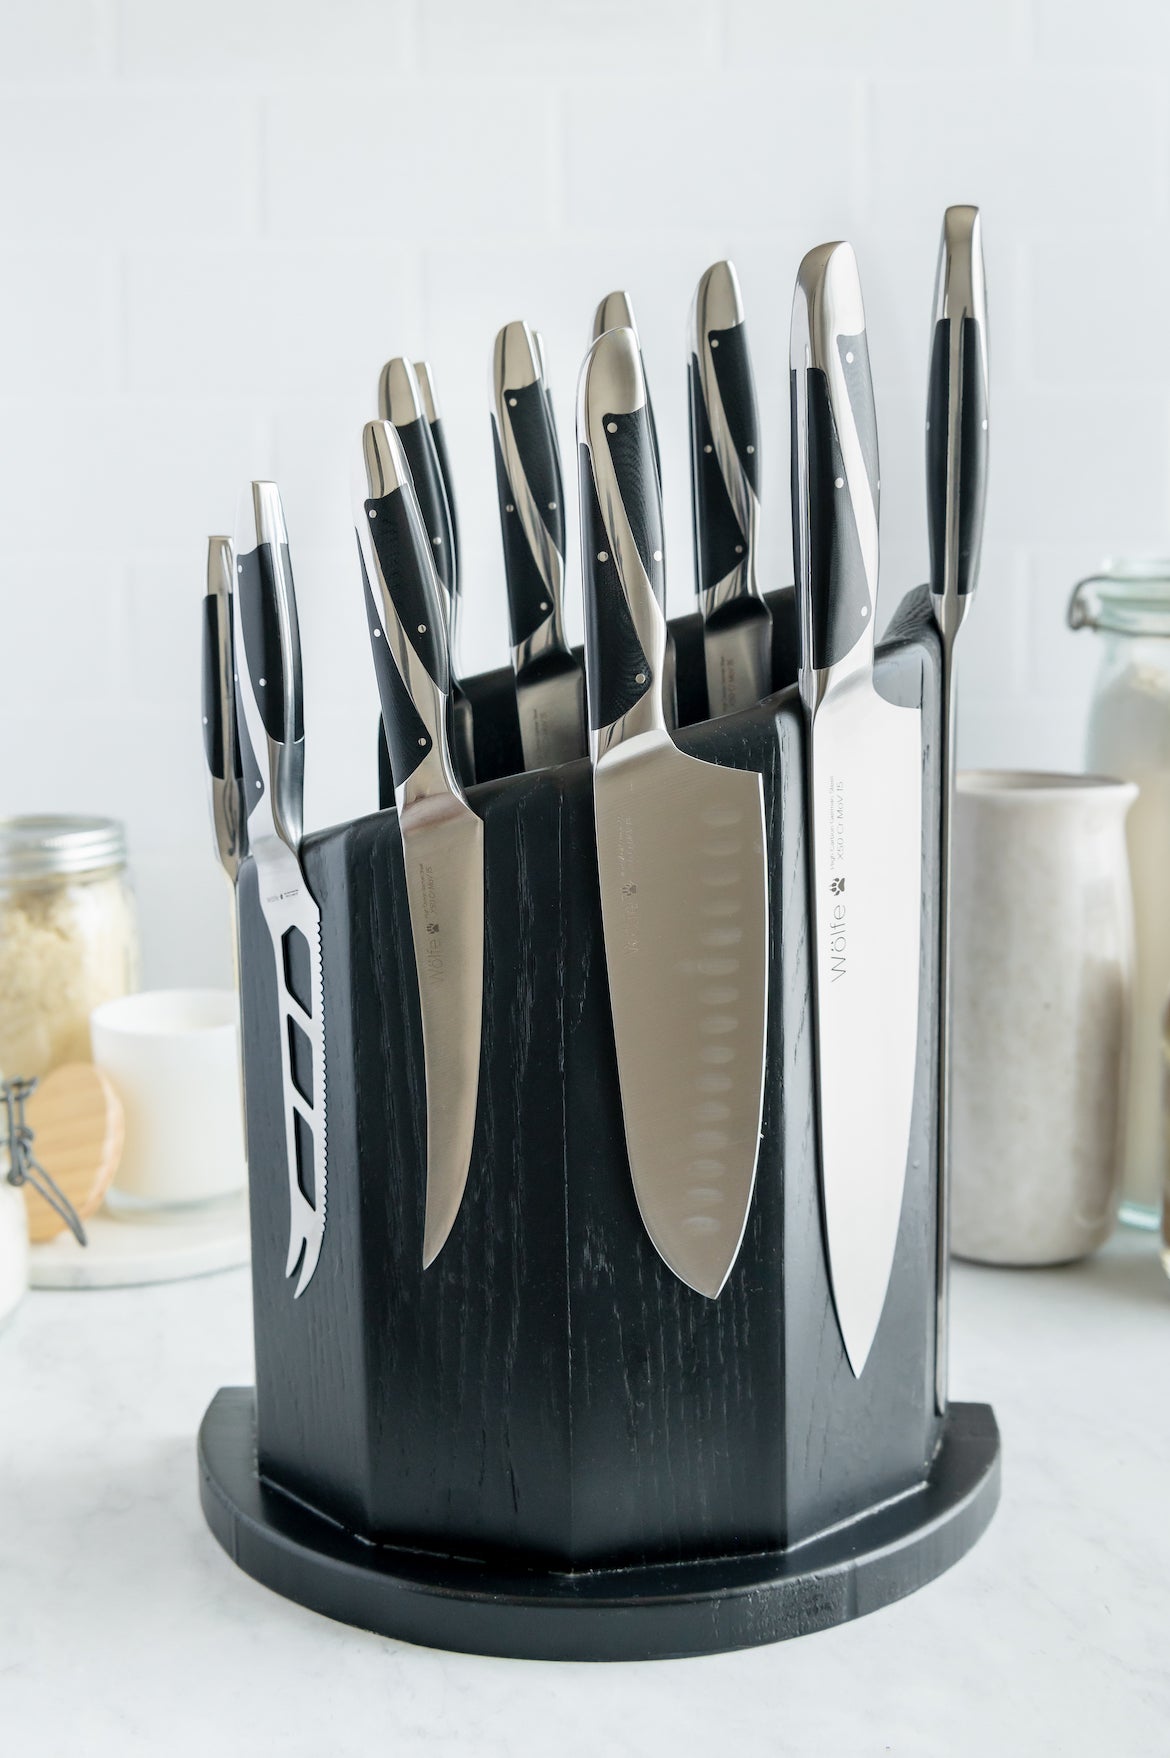 Emeril 15 Pc. Forged Knife Block Set, Cutlery, Household